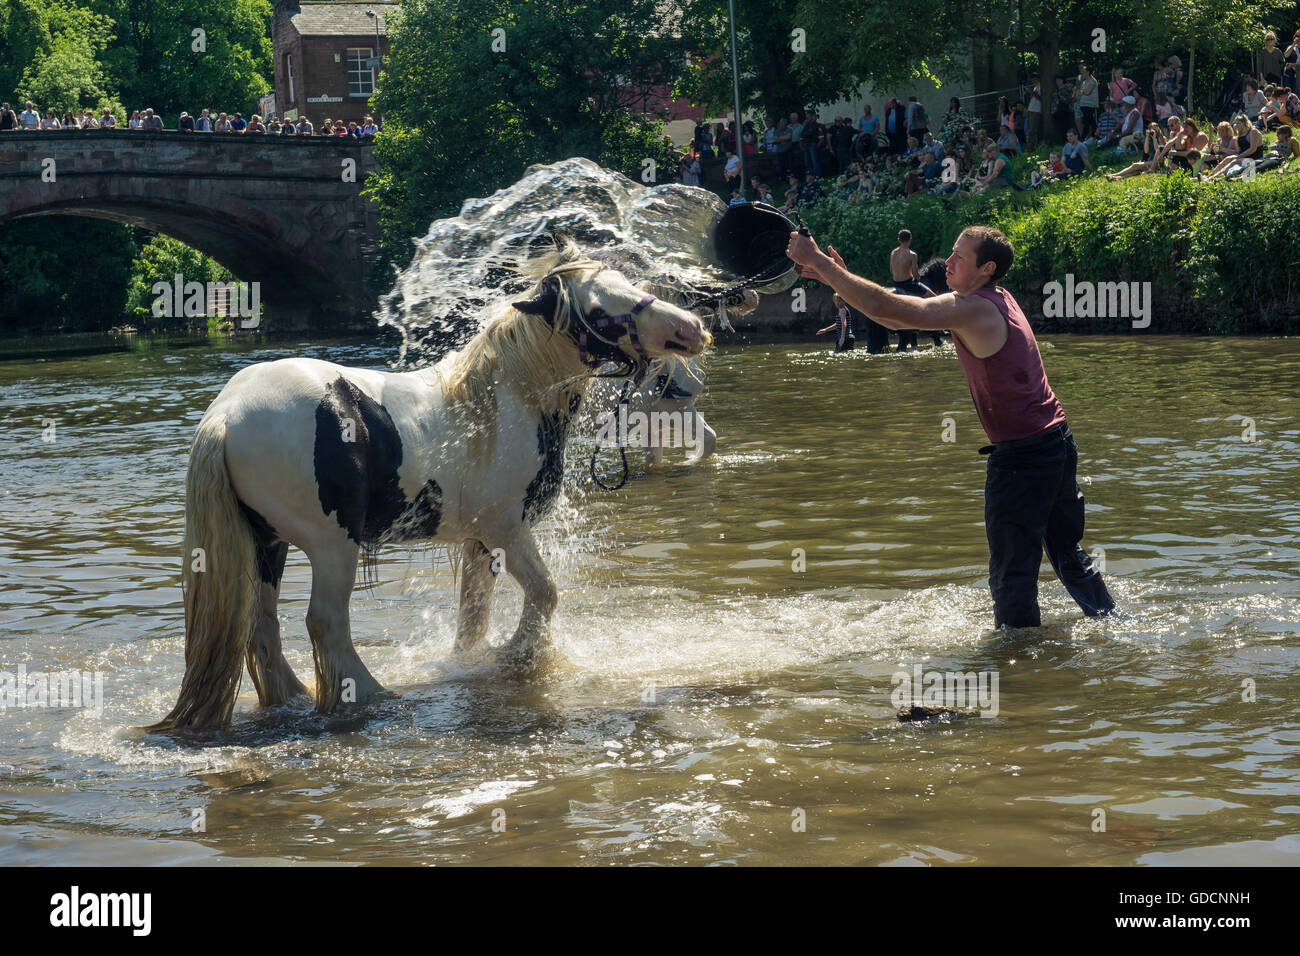 Washing Horses in the river on a hot summer's day at Appleby Horse Fair, Appleby Stock Photo